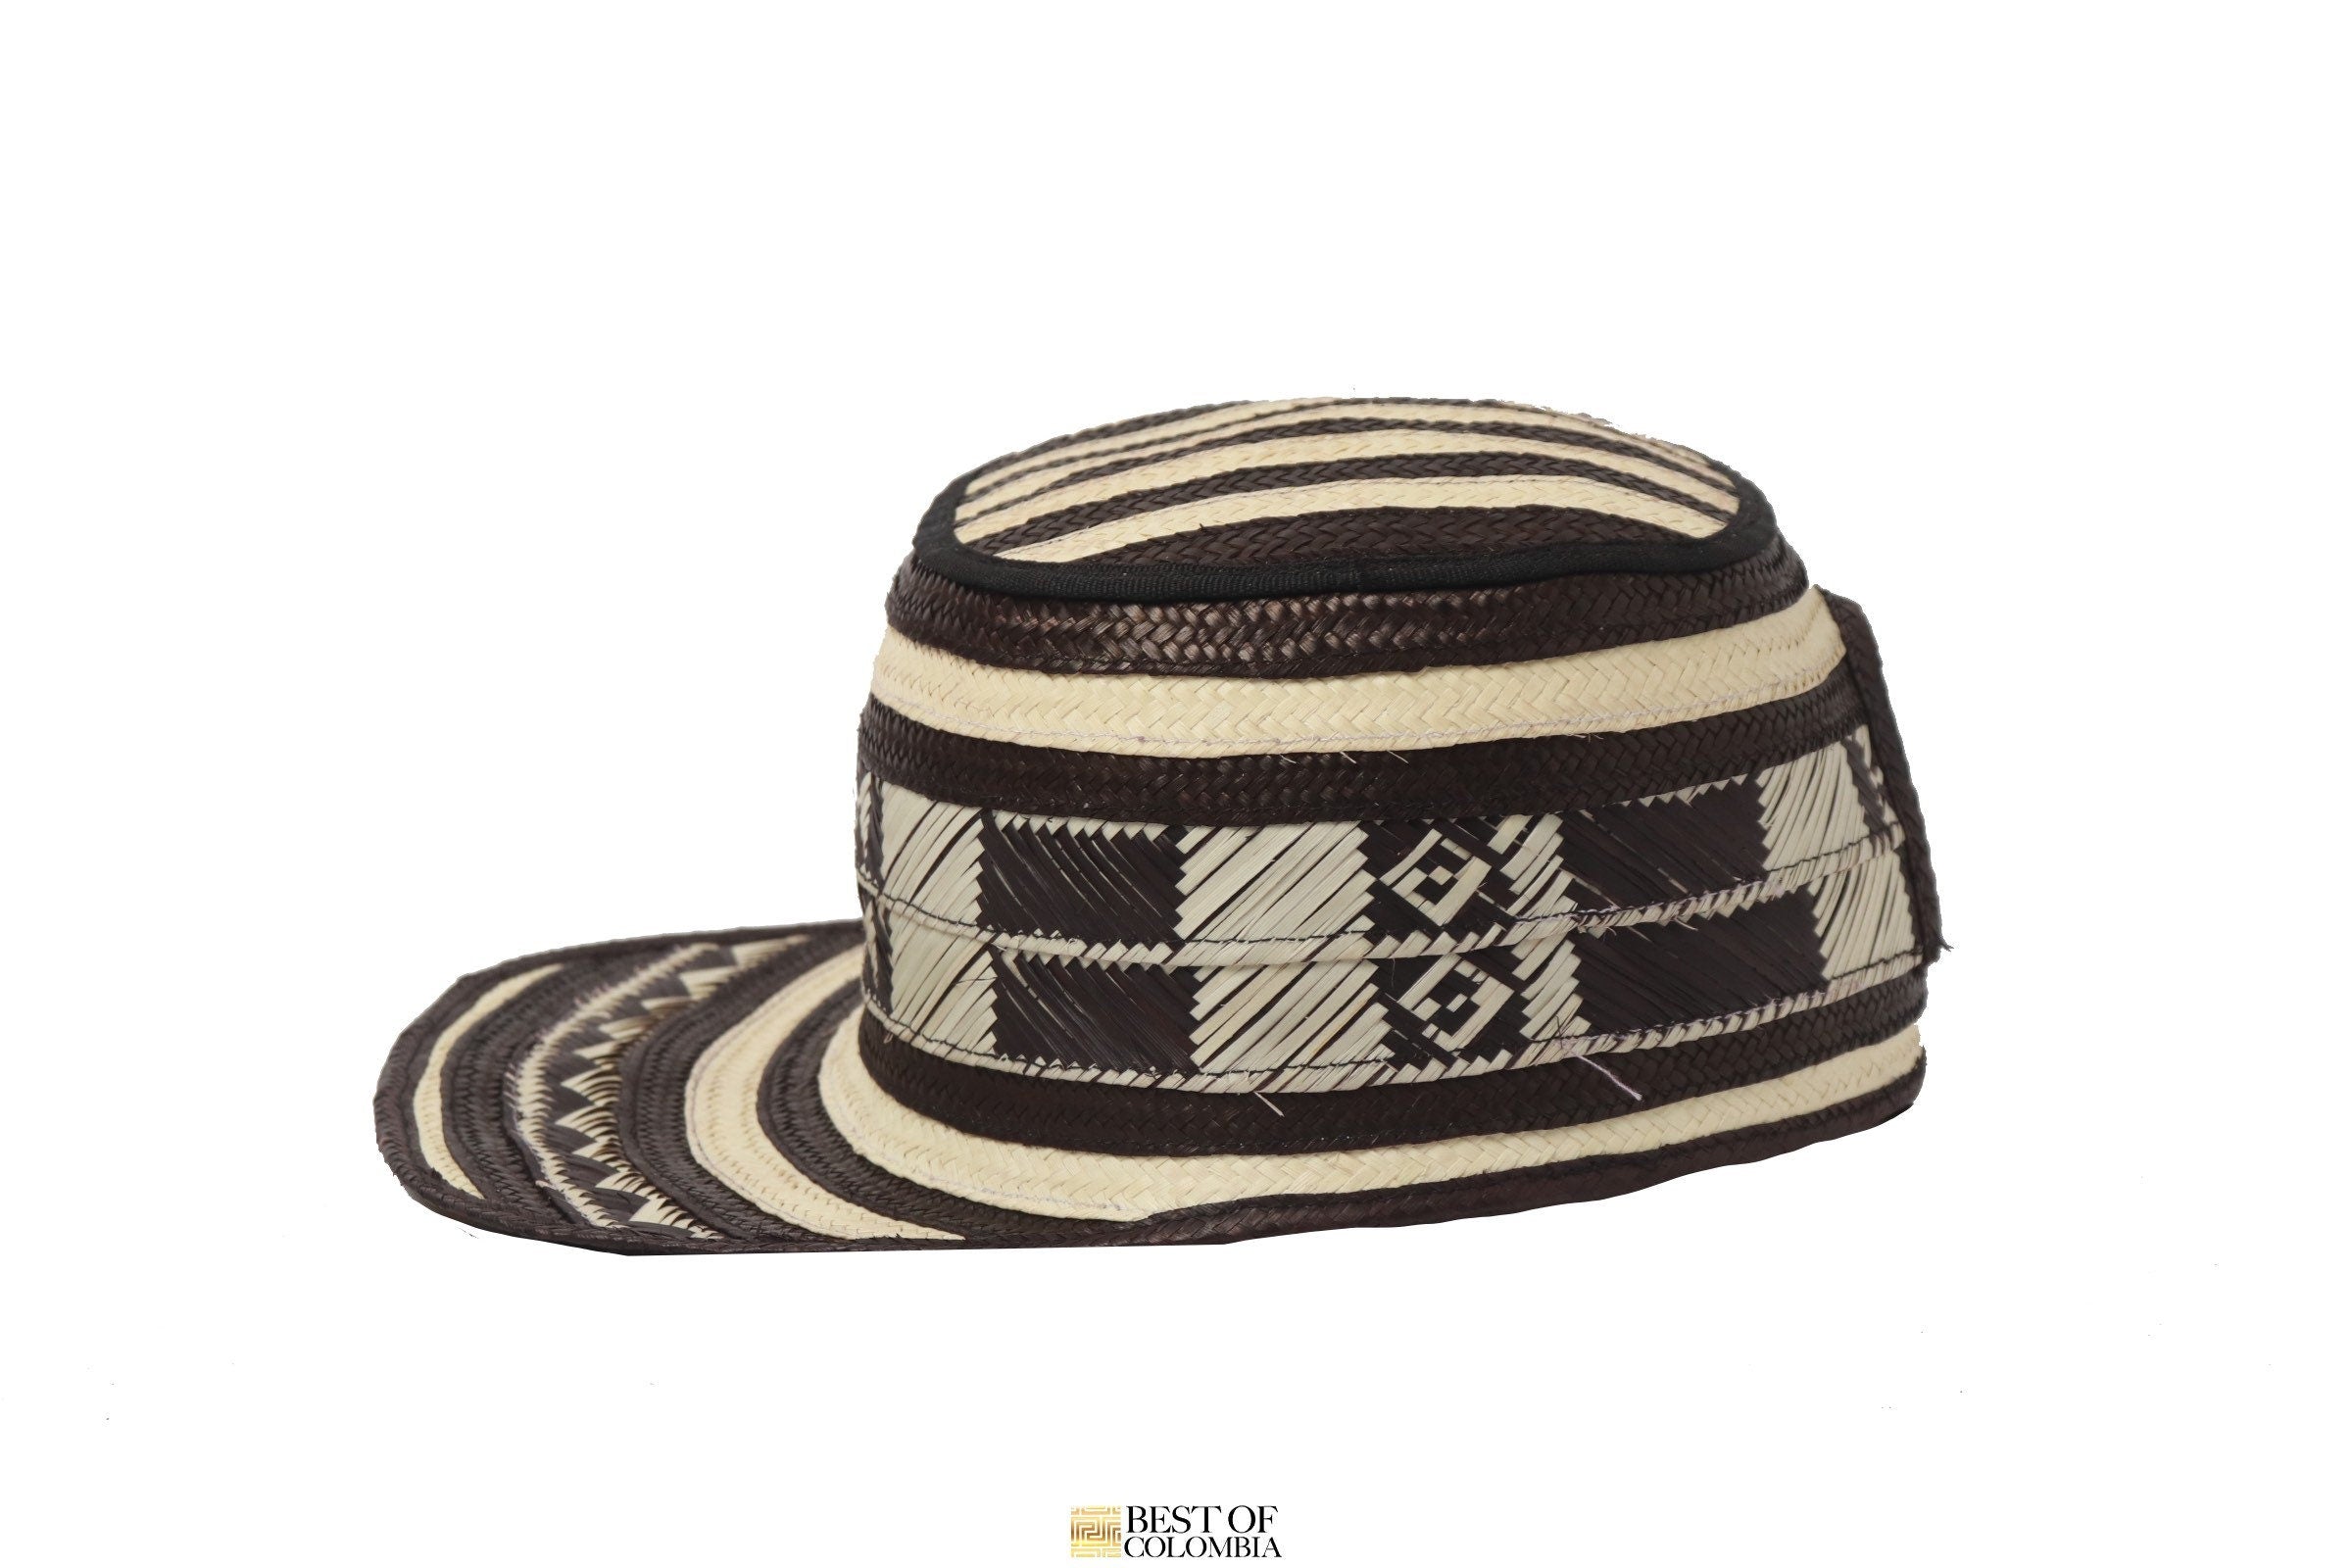 Vueltiao Cap Hat - Traditional Colombian Hat